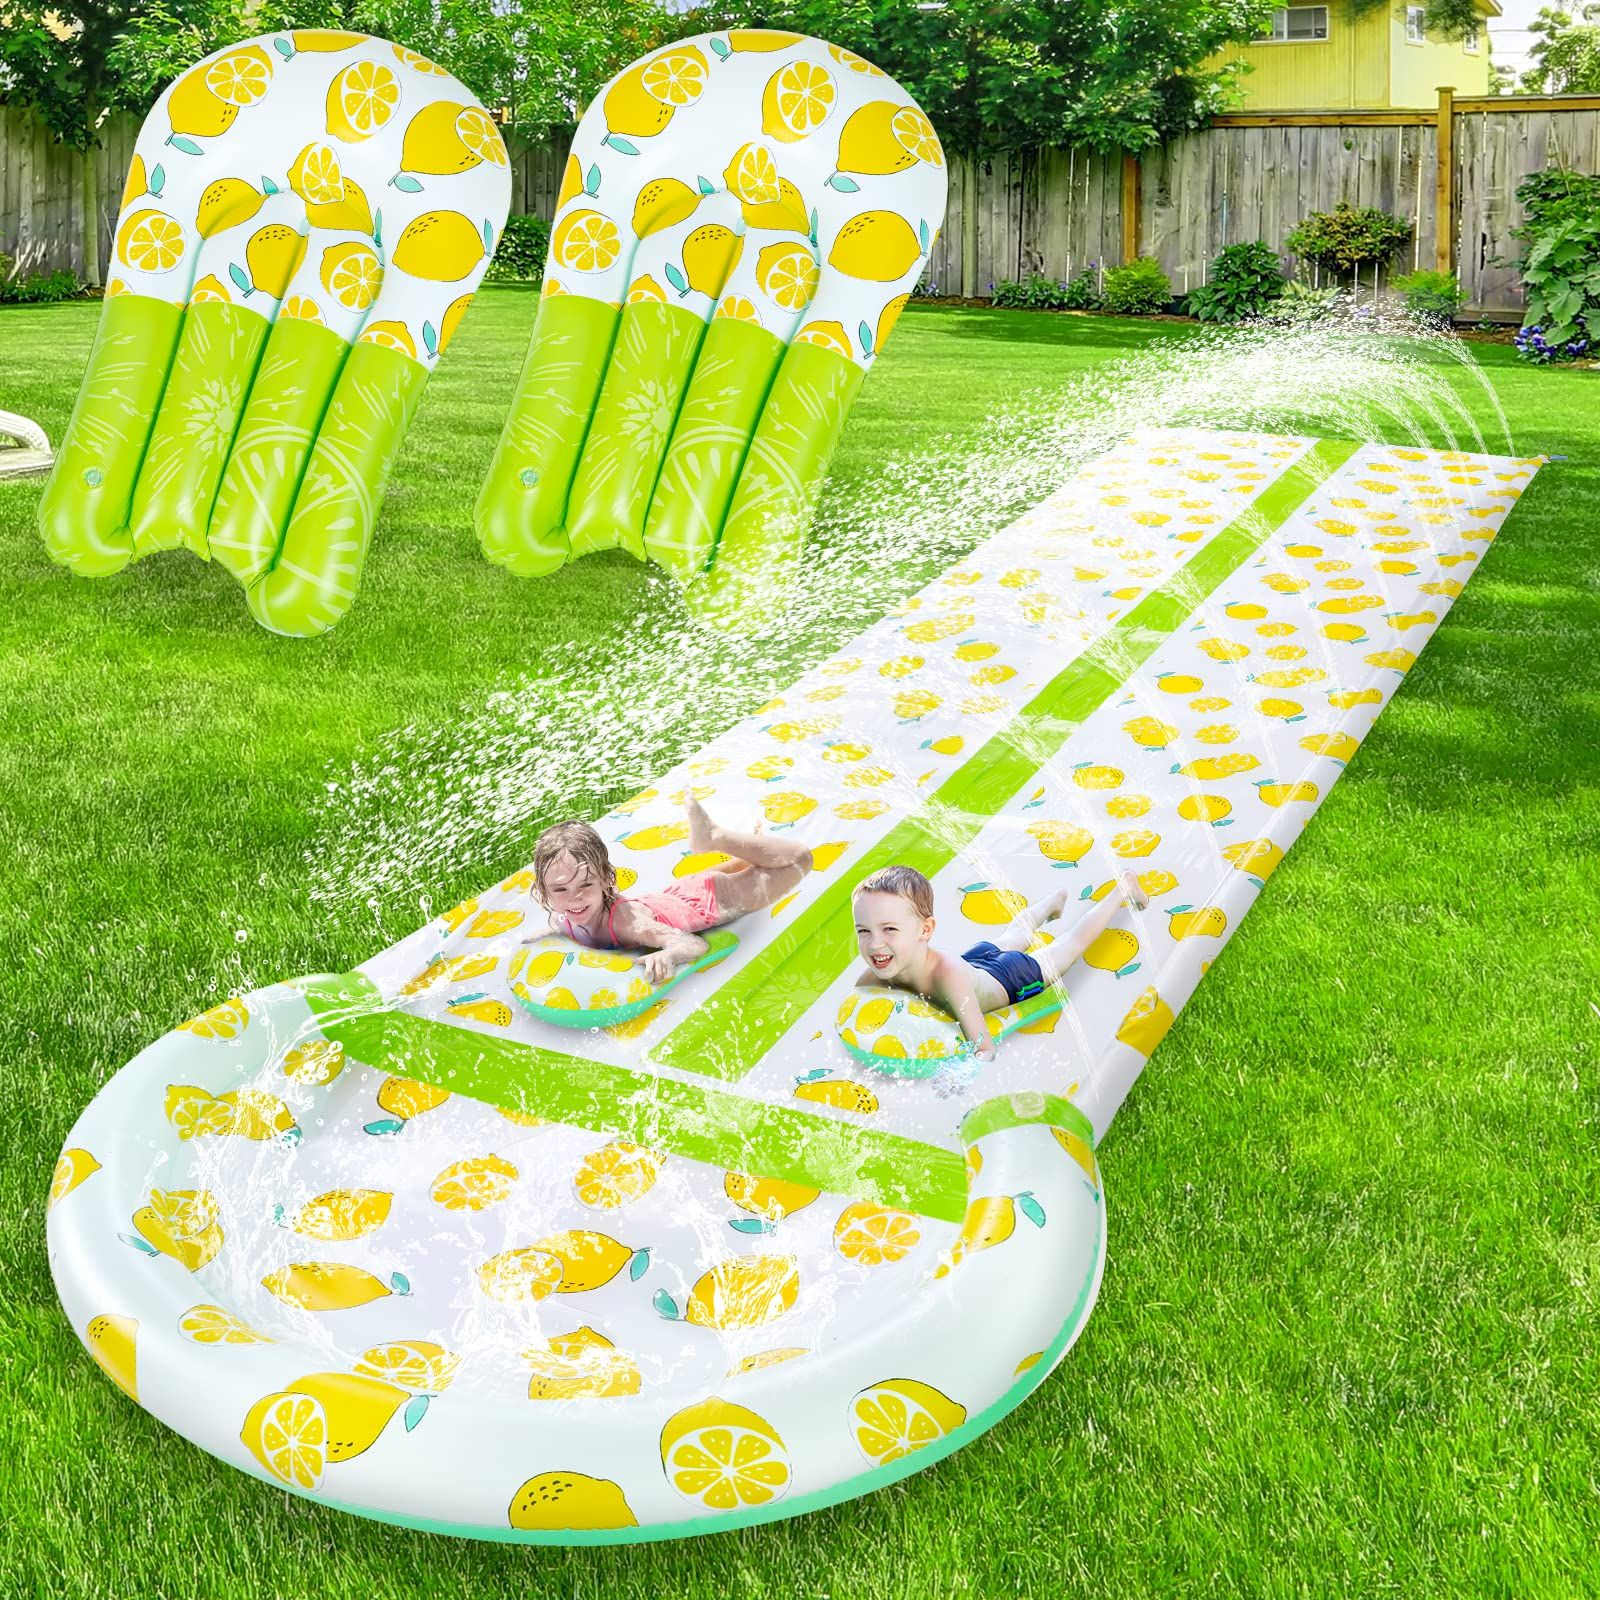 Inflatable Lawn Water Slide with Sprinkler, Lawn Water Slide Summer Slip Toy with 2 Bodyboards, Sports Outdoor Garden Backyard Water Play Toys for Adults Kids Family Games | Amazon (US)